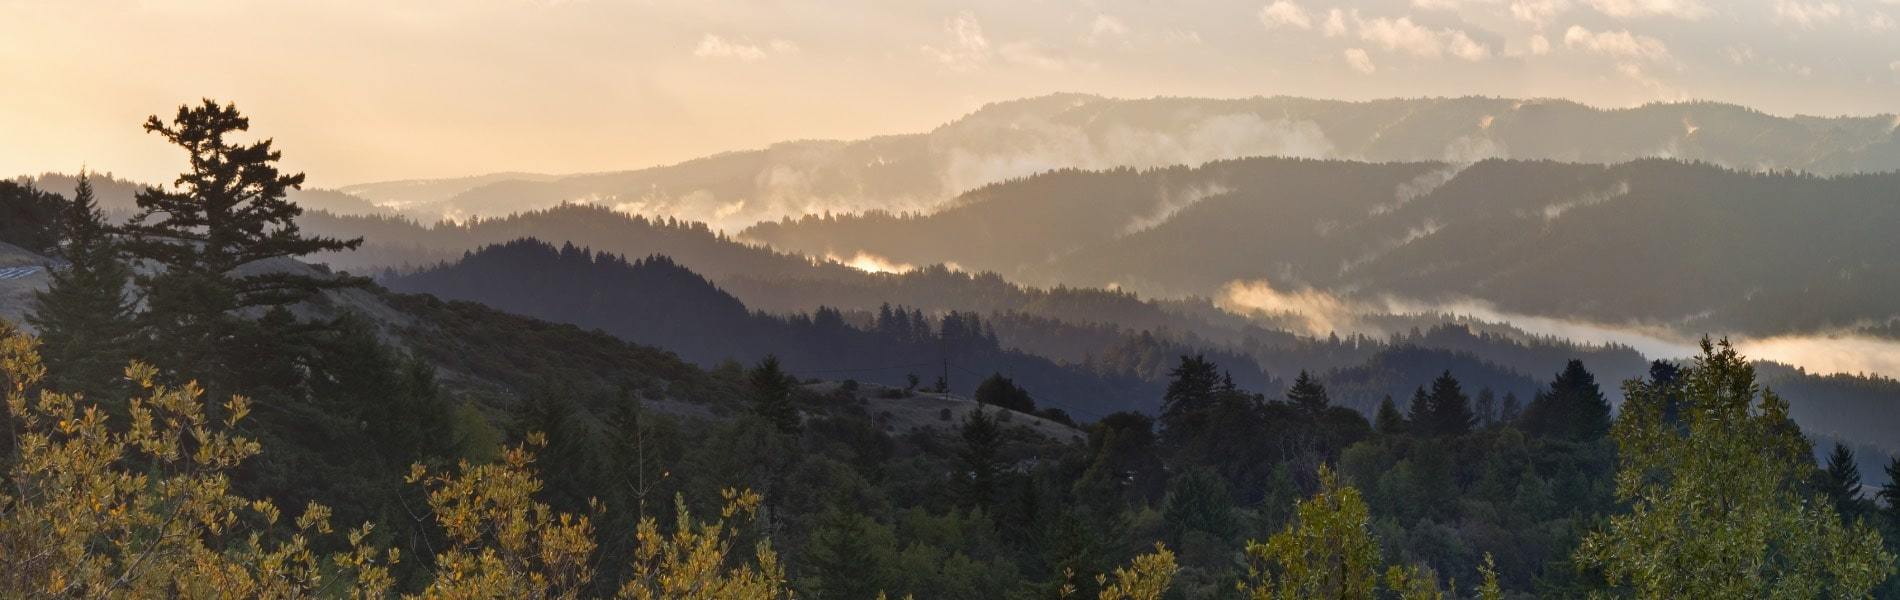 Morning view of Scotts Valley, CA mountains